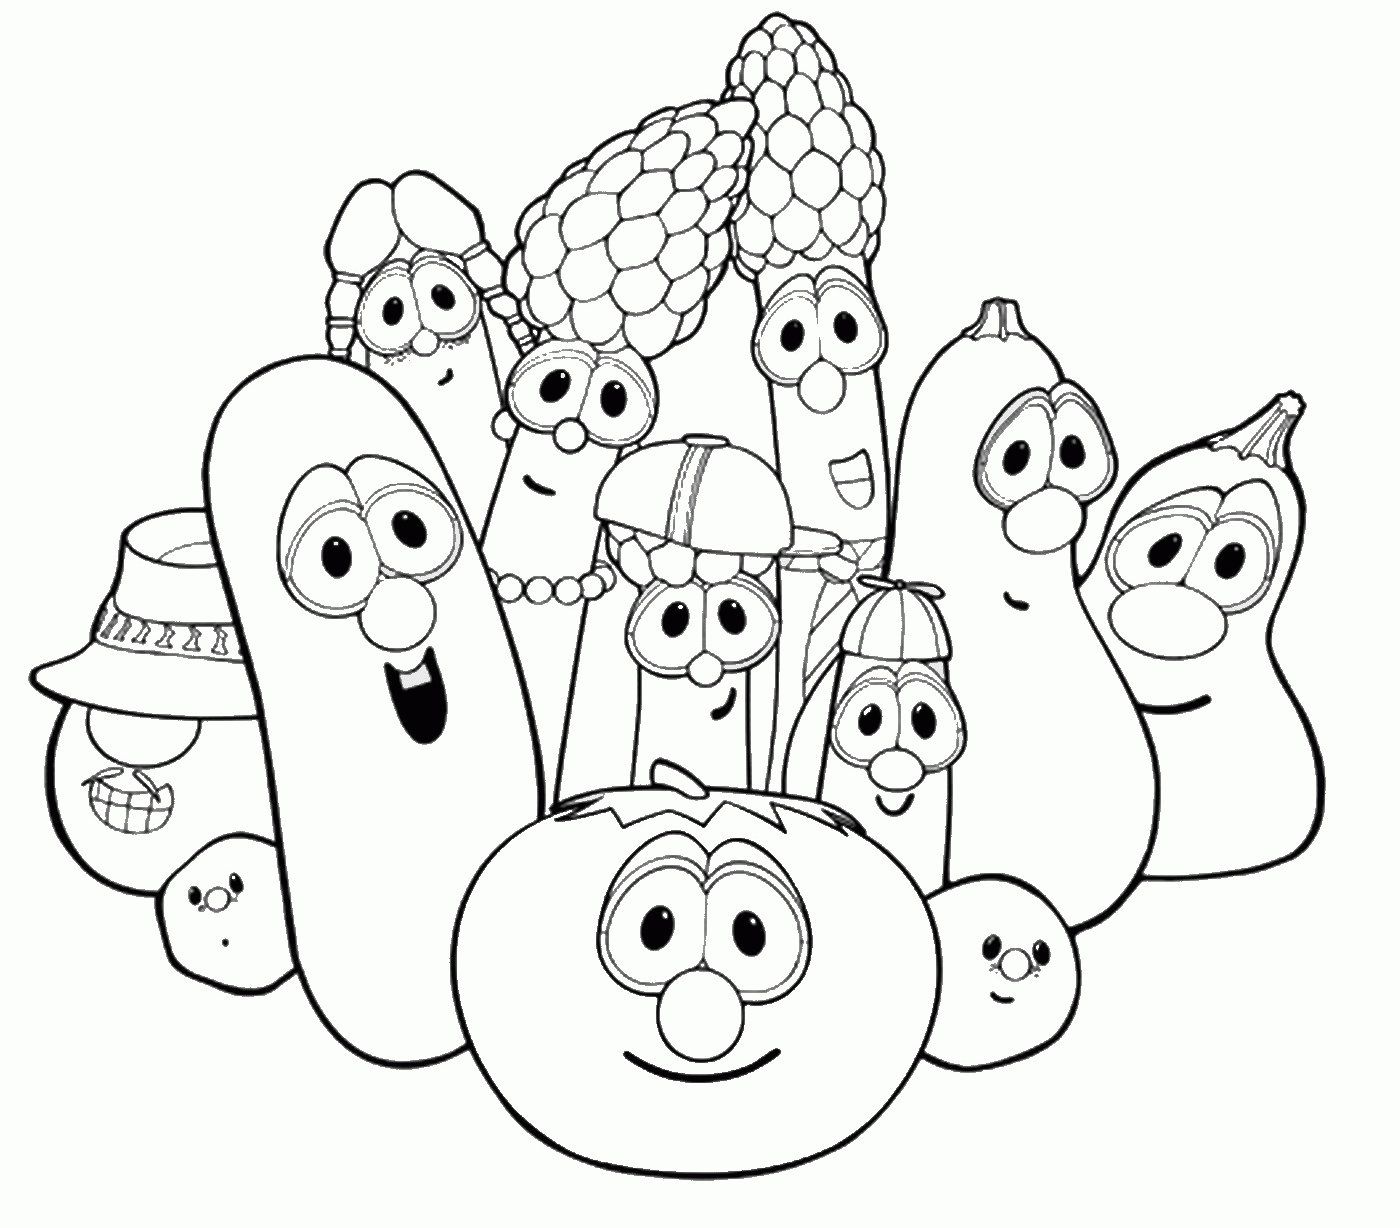 VeggieTales Coloring Page - Coloring Home